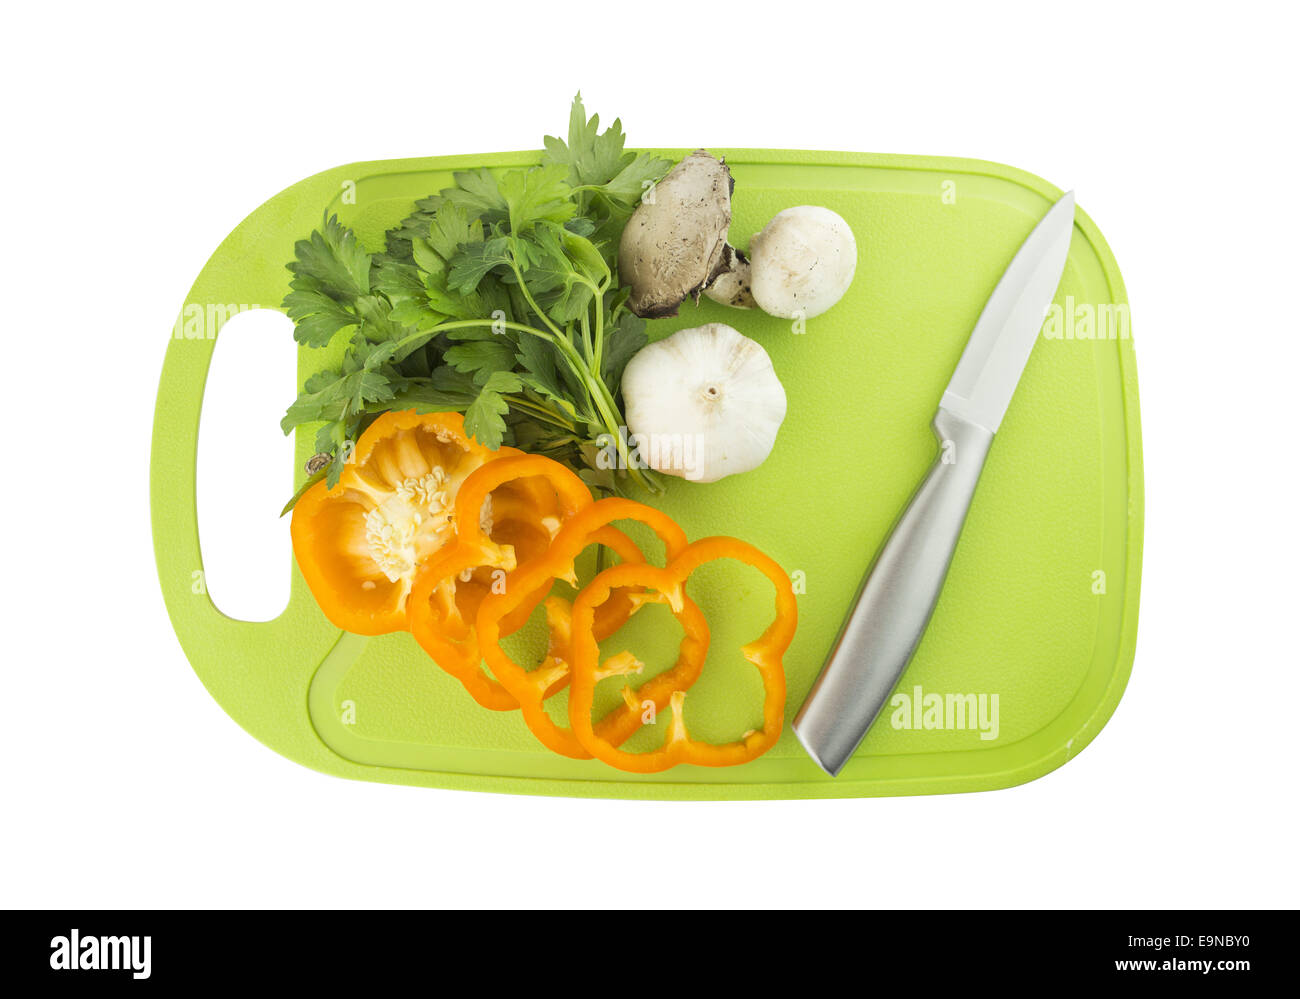 Plastic Round Shaped Cutting Board For Kitchen Fruits & Vegetable Green  Color